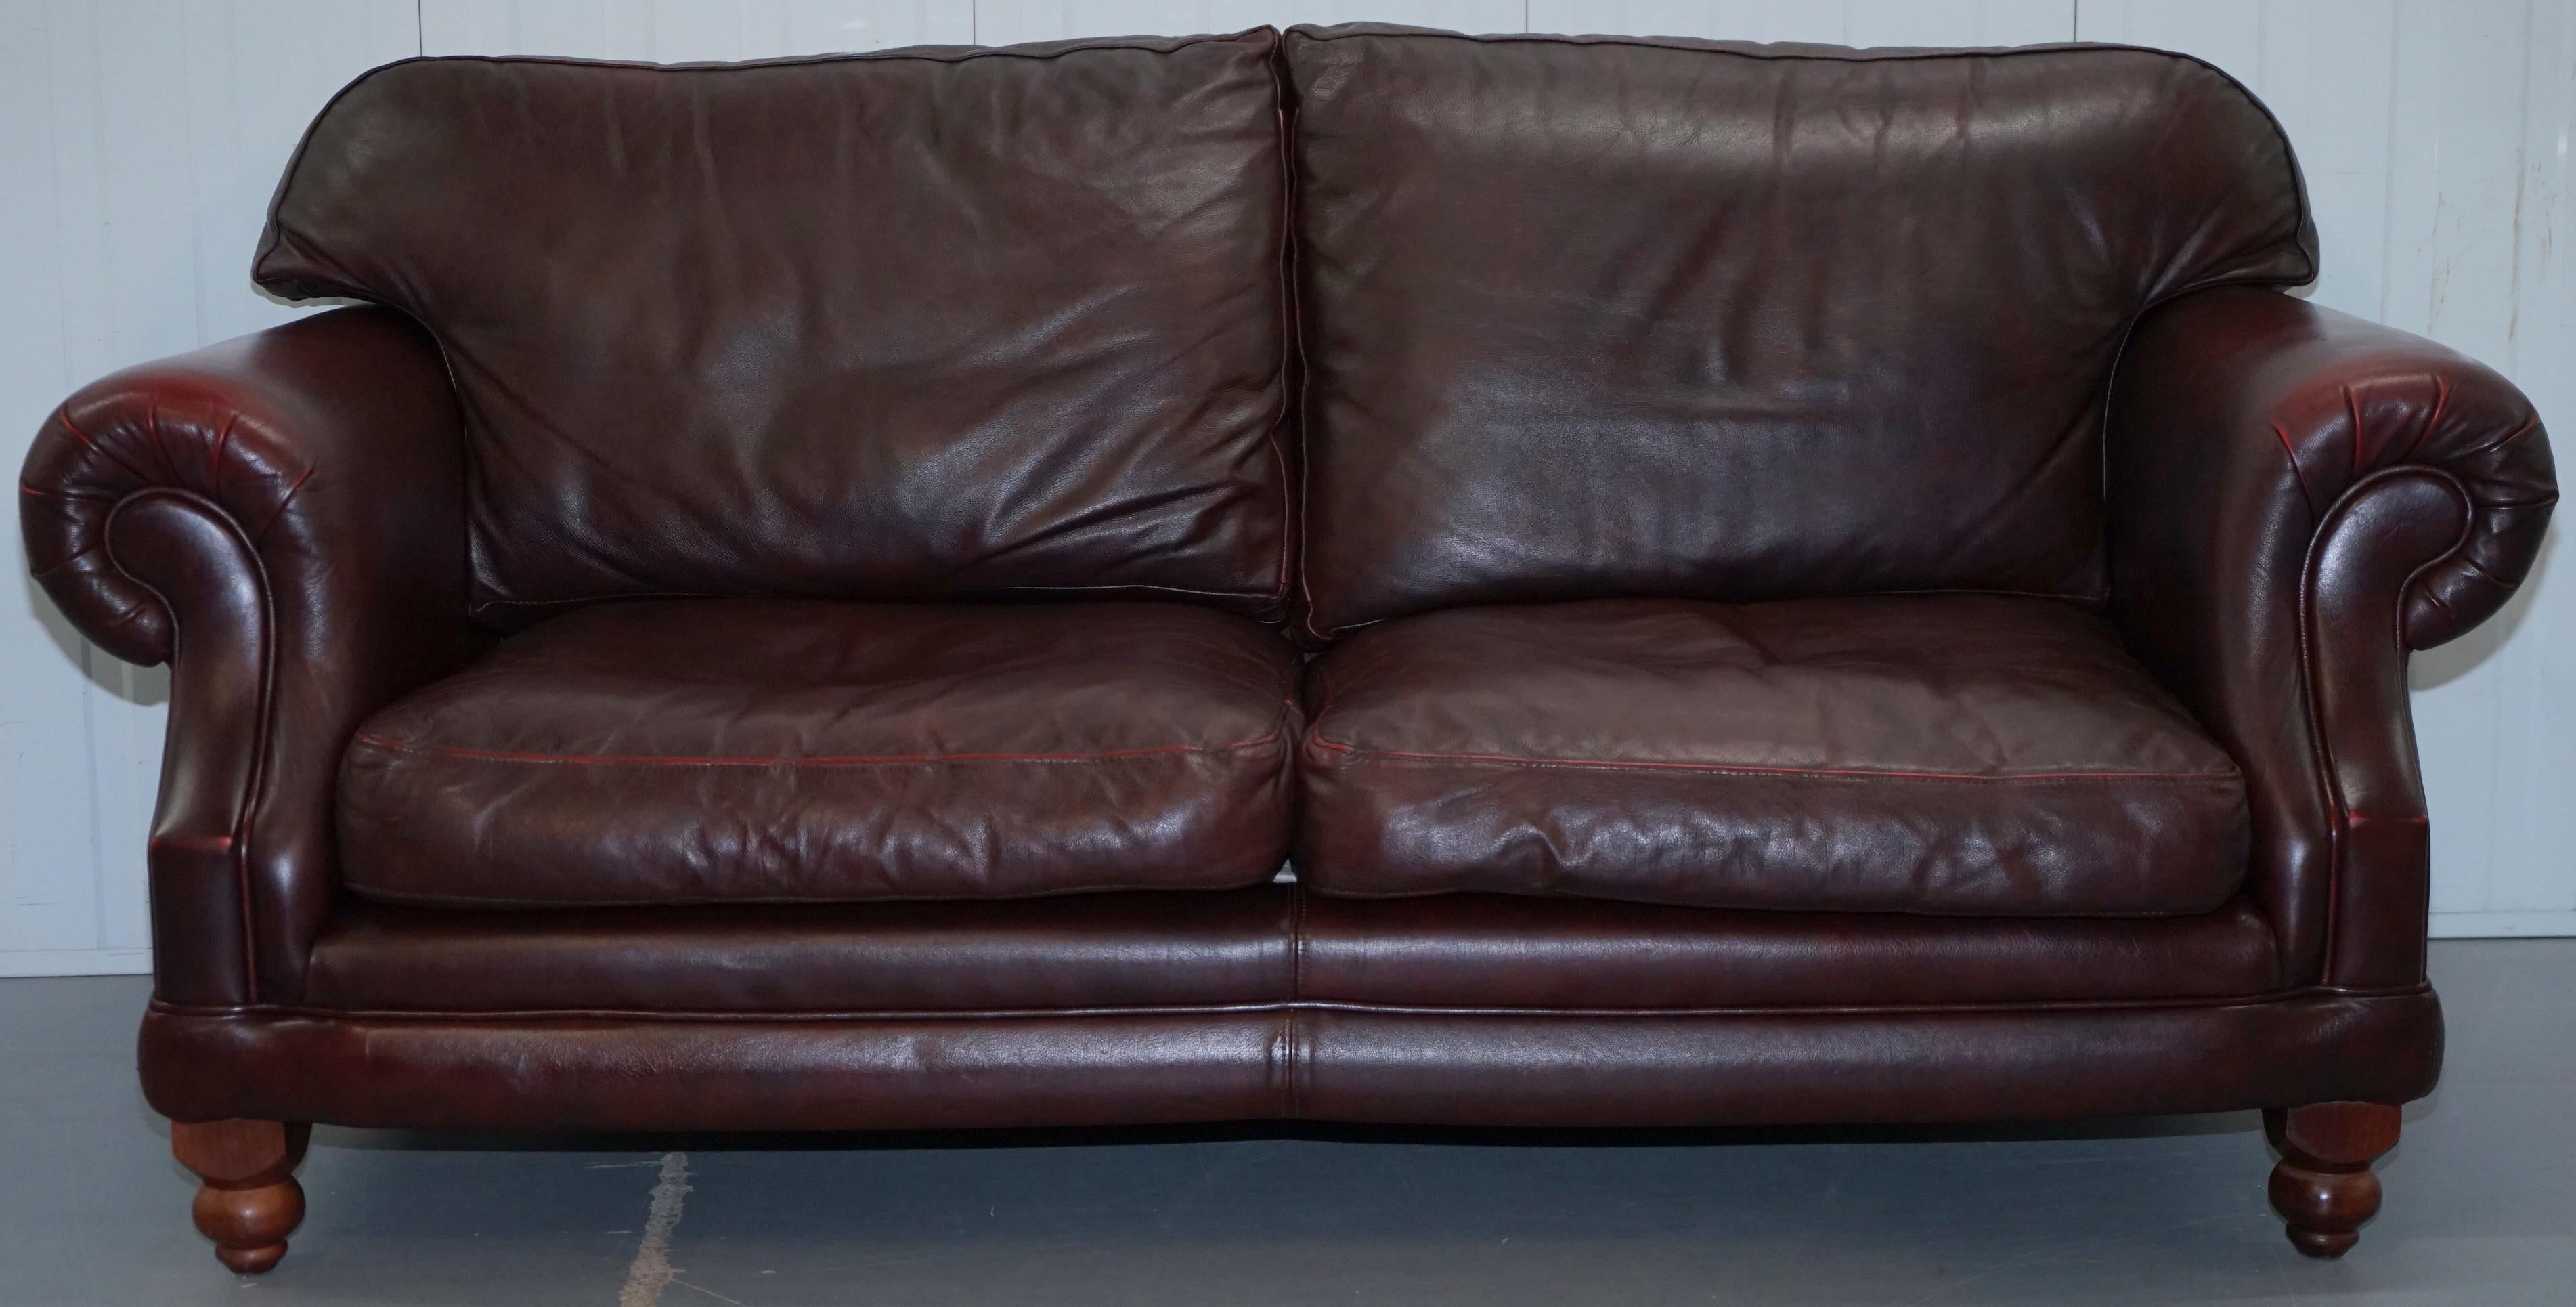 We are delighted to offer for sale 1 of 2 Thomas Lloyd Consort oxblood leather contemporary sofas

A good looking and well piece, the leather upholstery is thick, the base and back cushions medium soft so very comfortable

We have deep cleaned